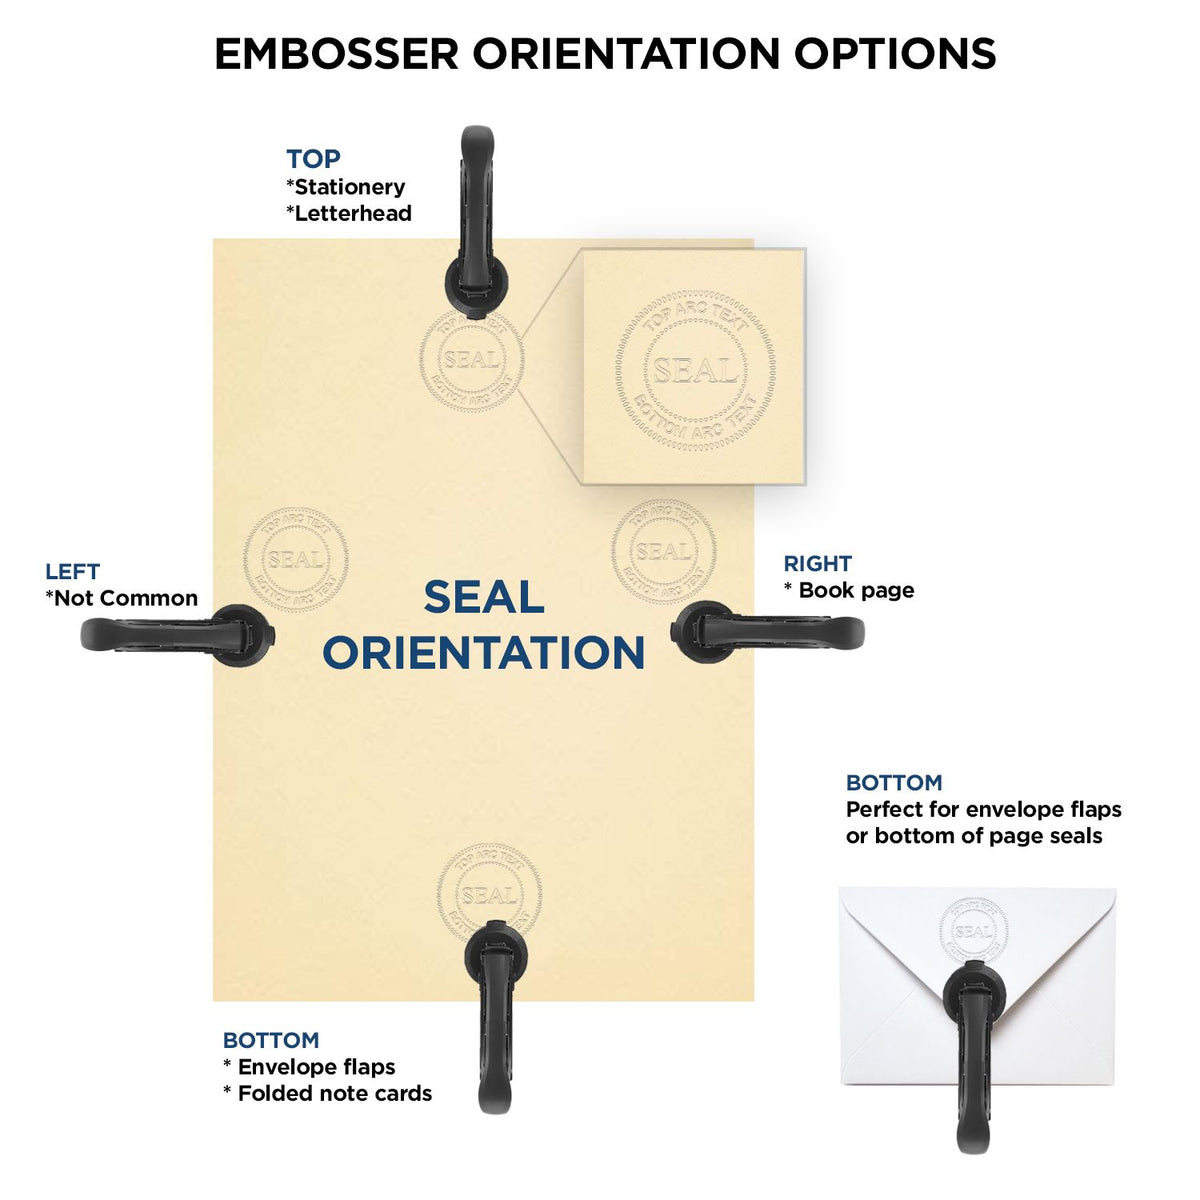 An infographic for the State of Illinois Long Reach Architectural Embossing Seal showing embosser orientation, this is showing examples of a top, bottom, right and left insert.